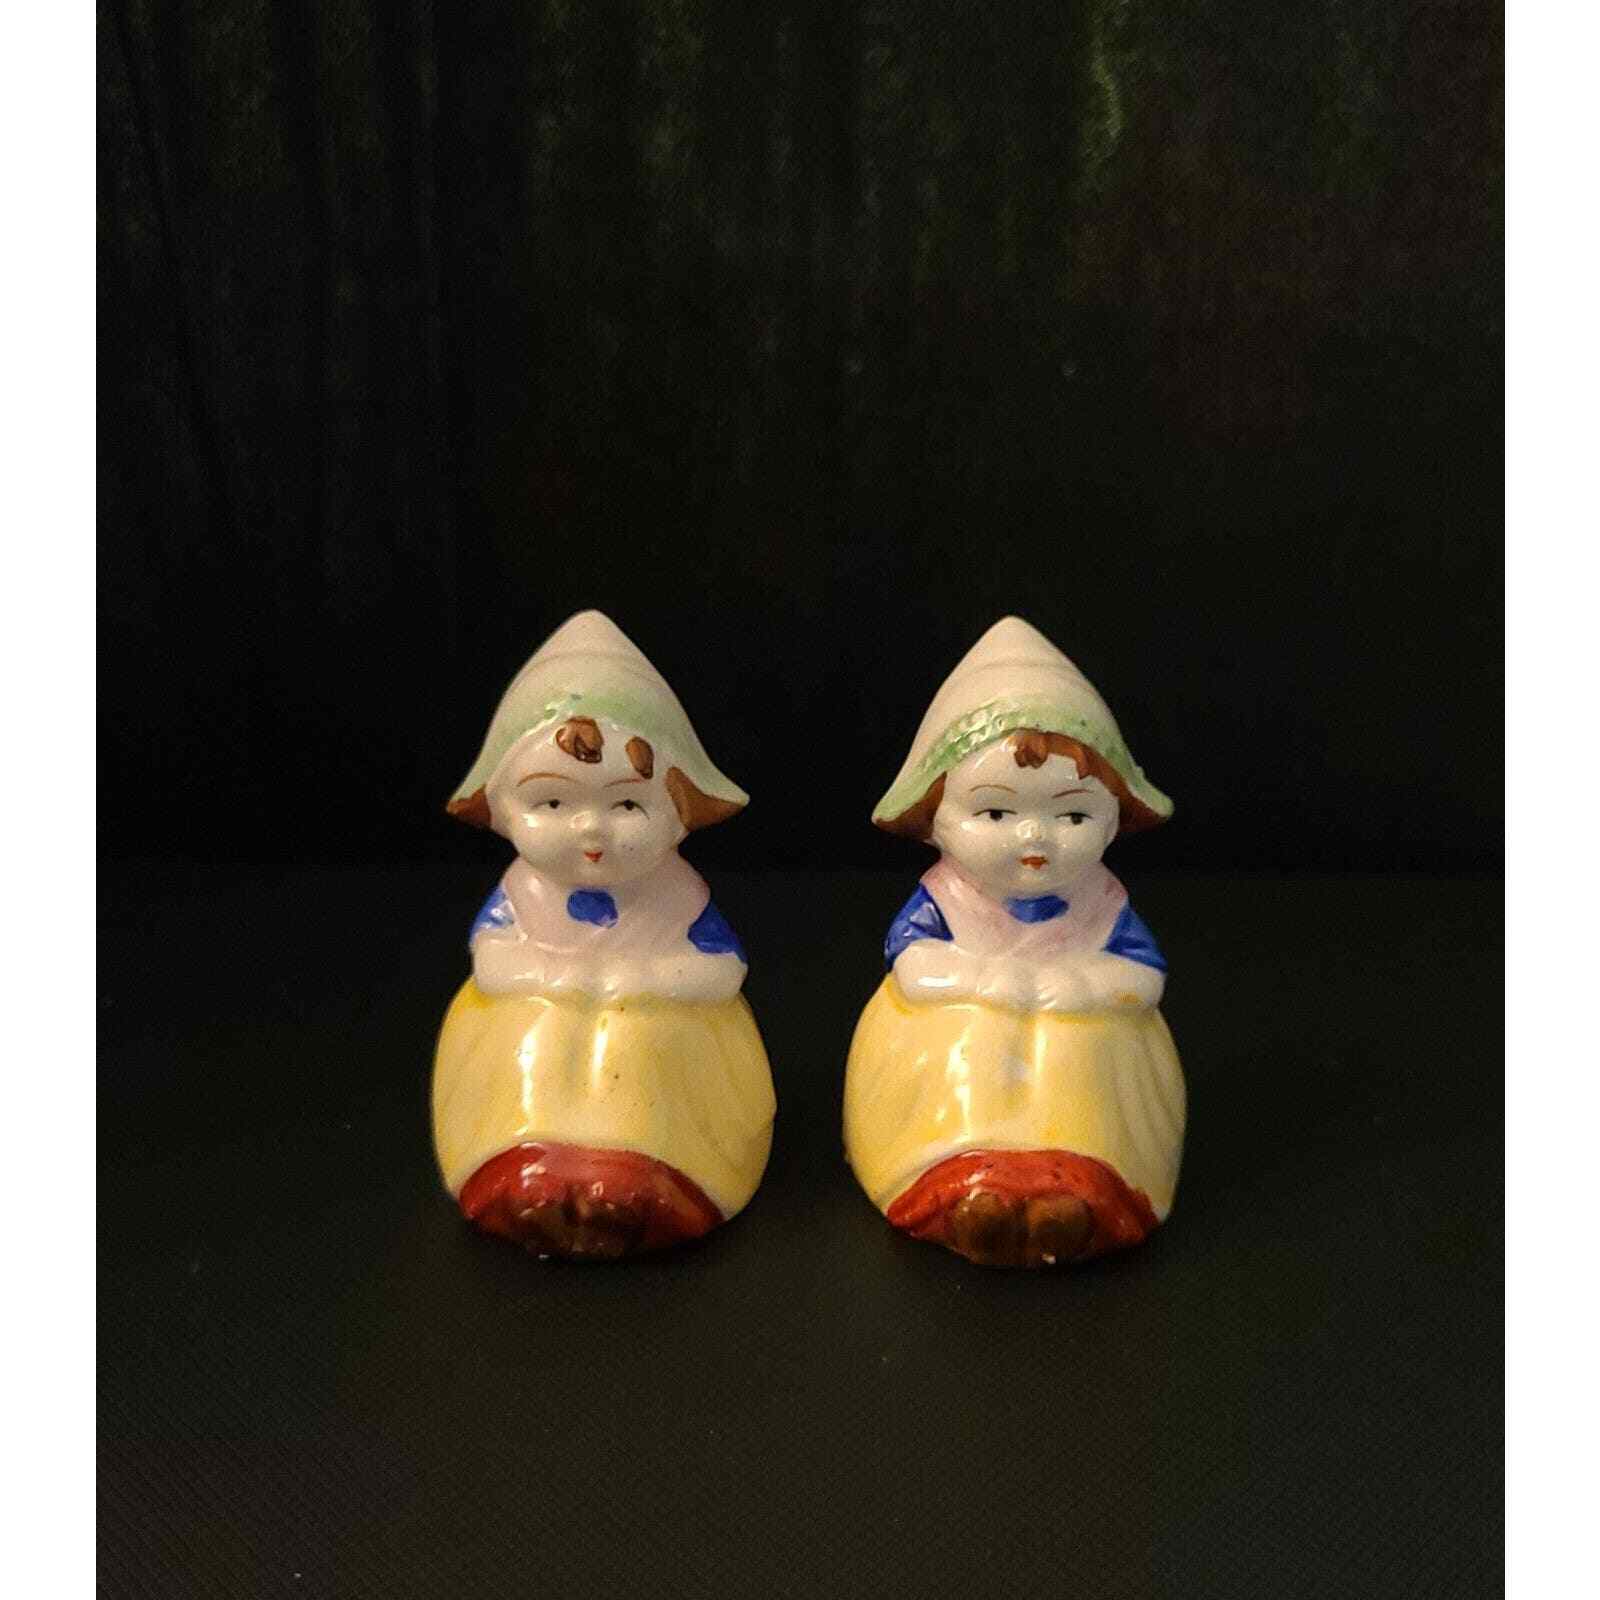 Vintage and Rare Dutch Girl Salt and Pepper Shakers